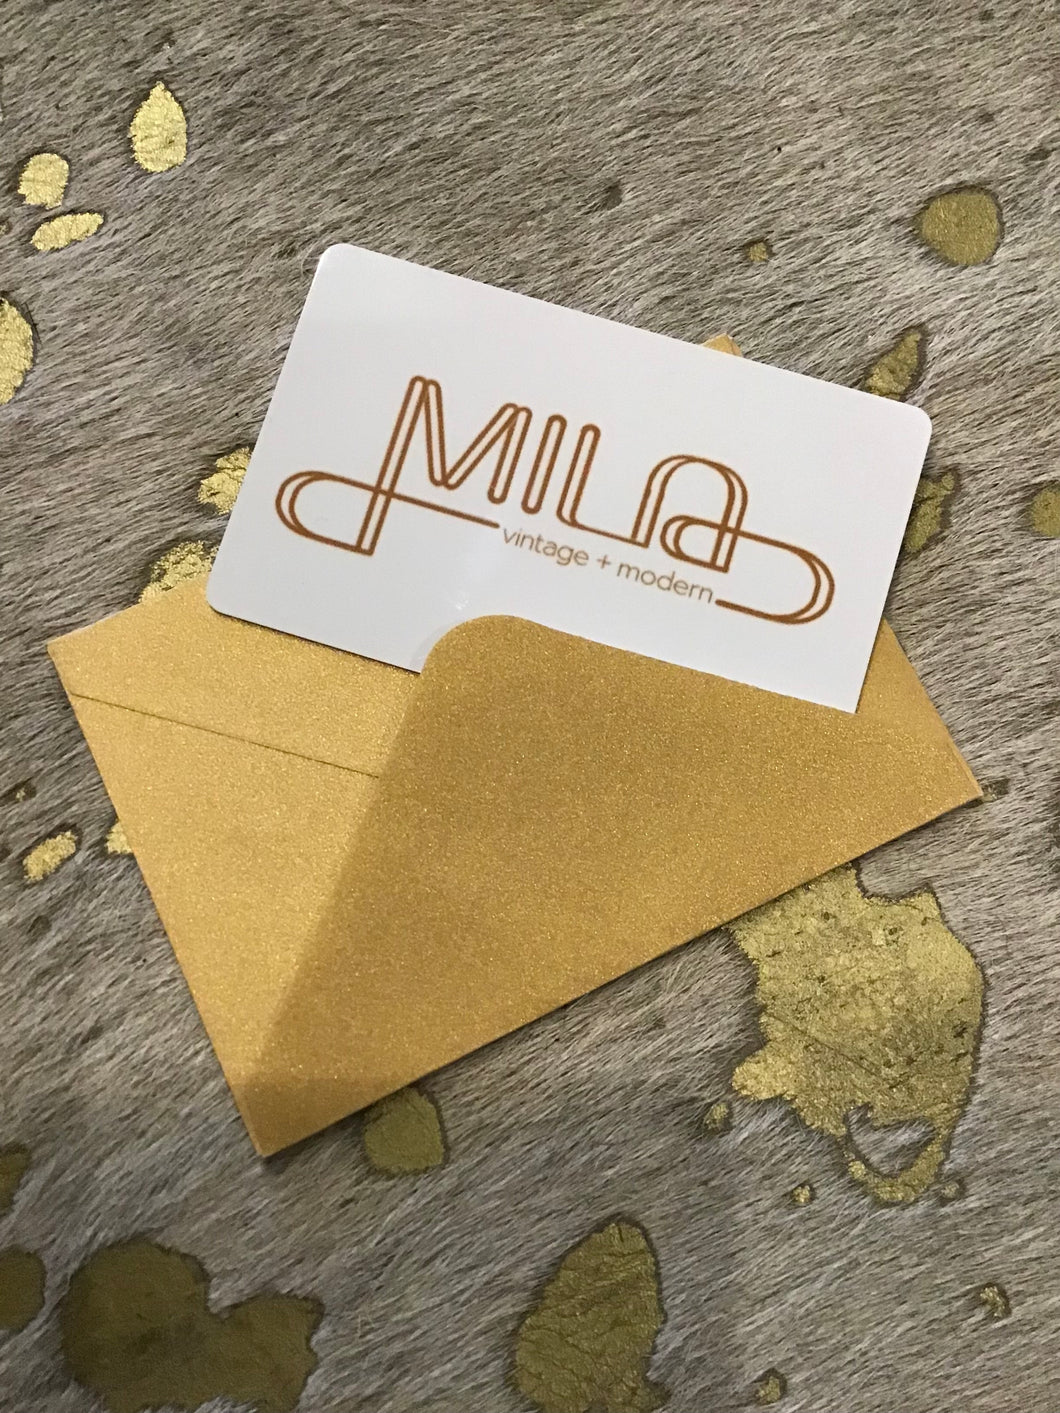 Mila North Park Gift Card